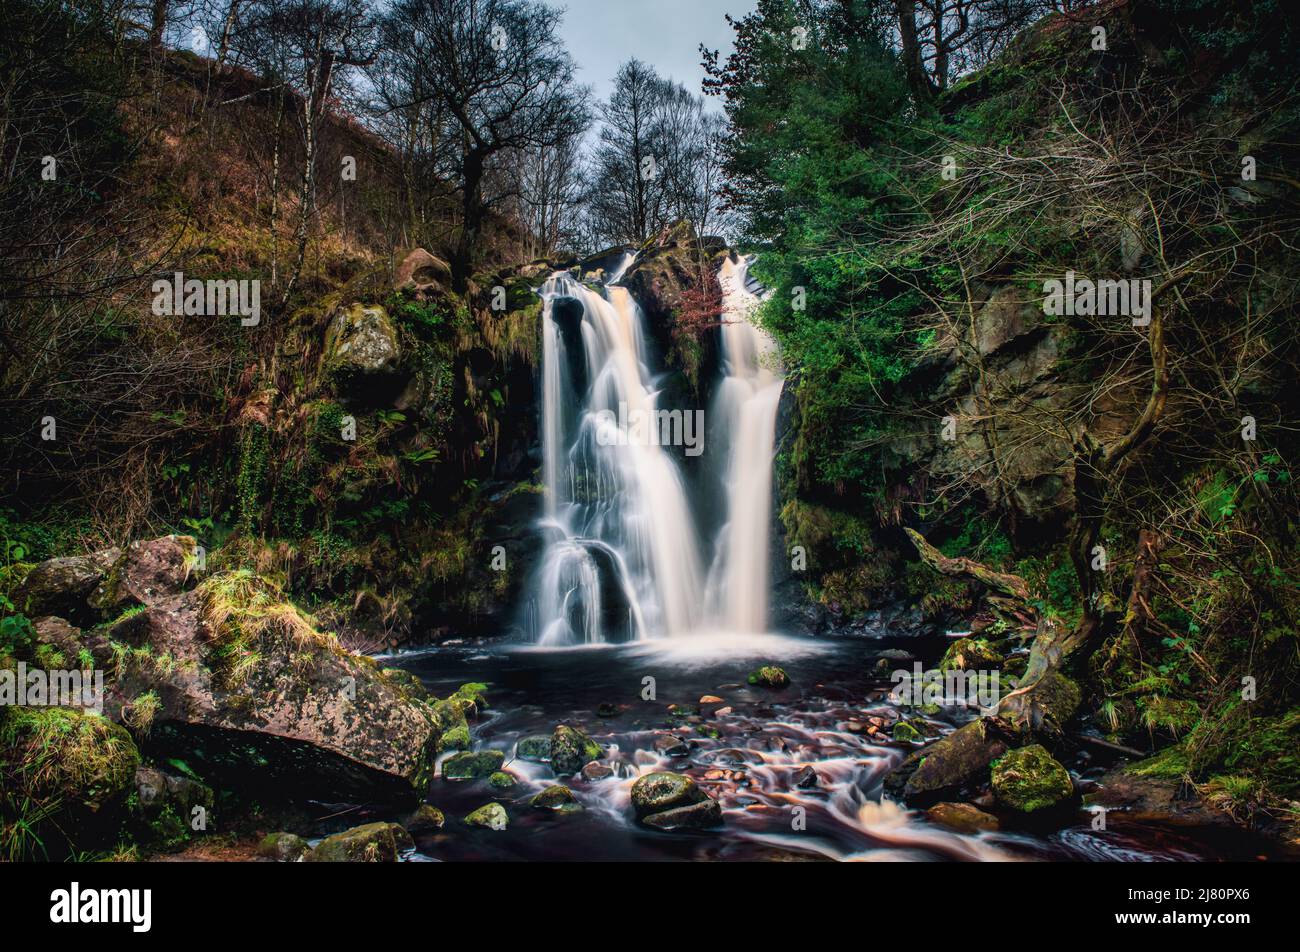 Posforth Gill Waterfall in the Valley of Desolation, Bolton Abbey, Yorkshire Dales National Park, Yorkshire, Angleterre, Royaume-Uni Banque D'Images